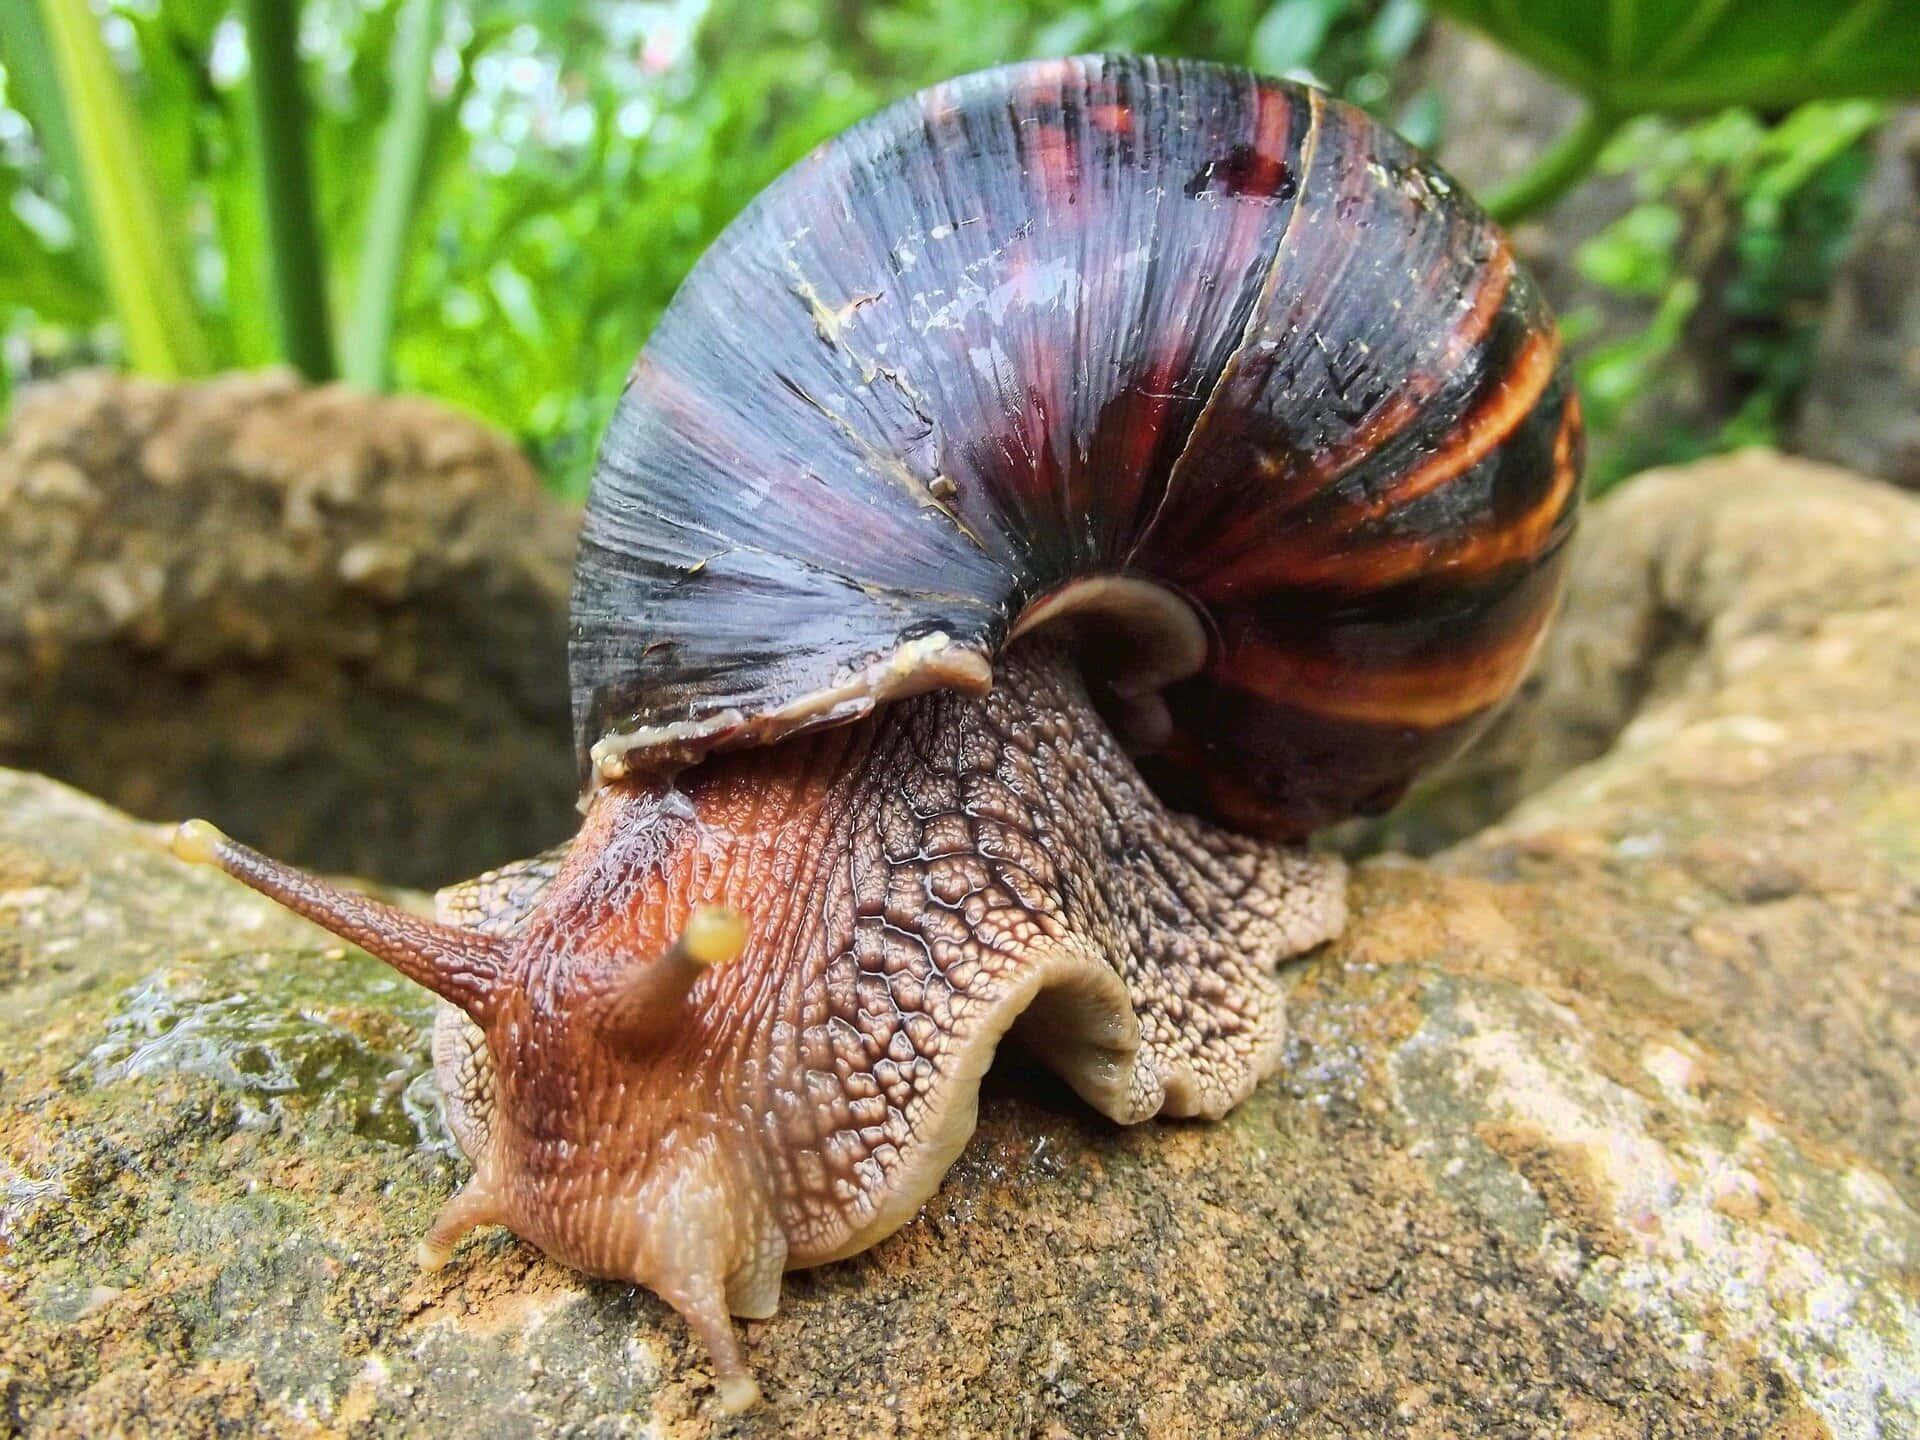 Image  Adorable Snail Taking Its Morning Journey